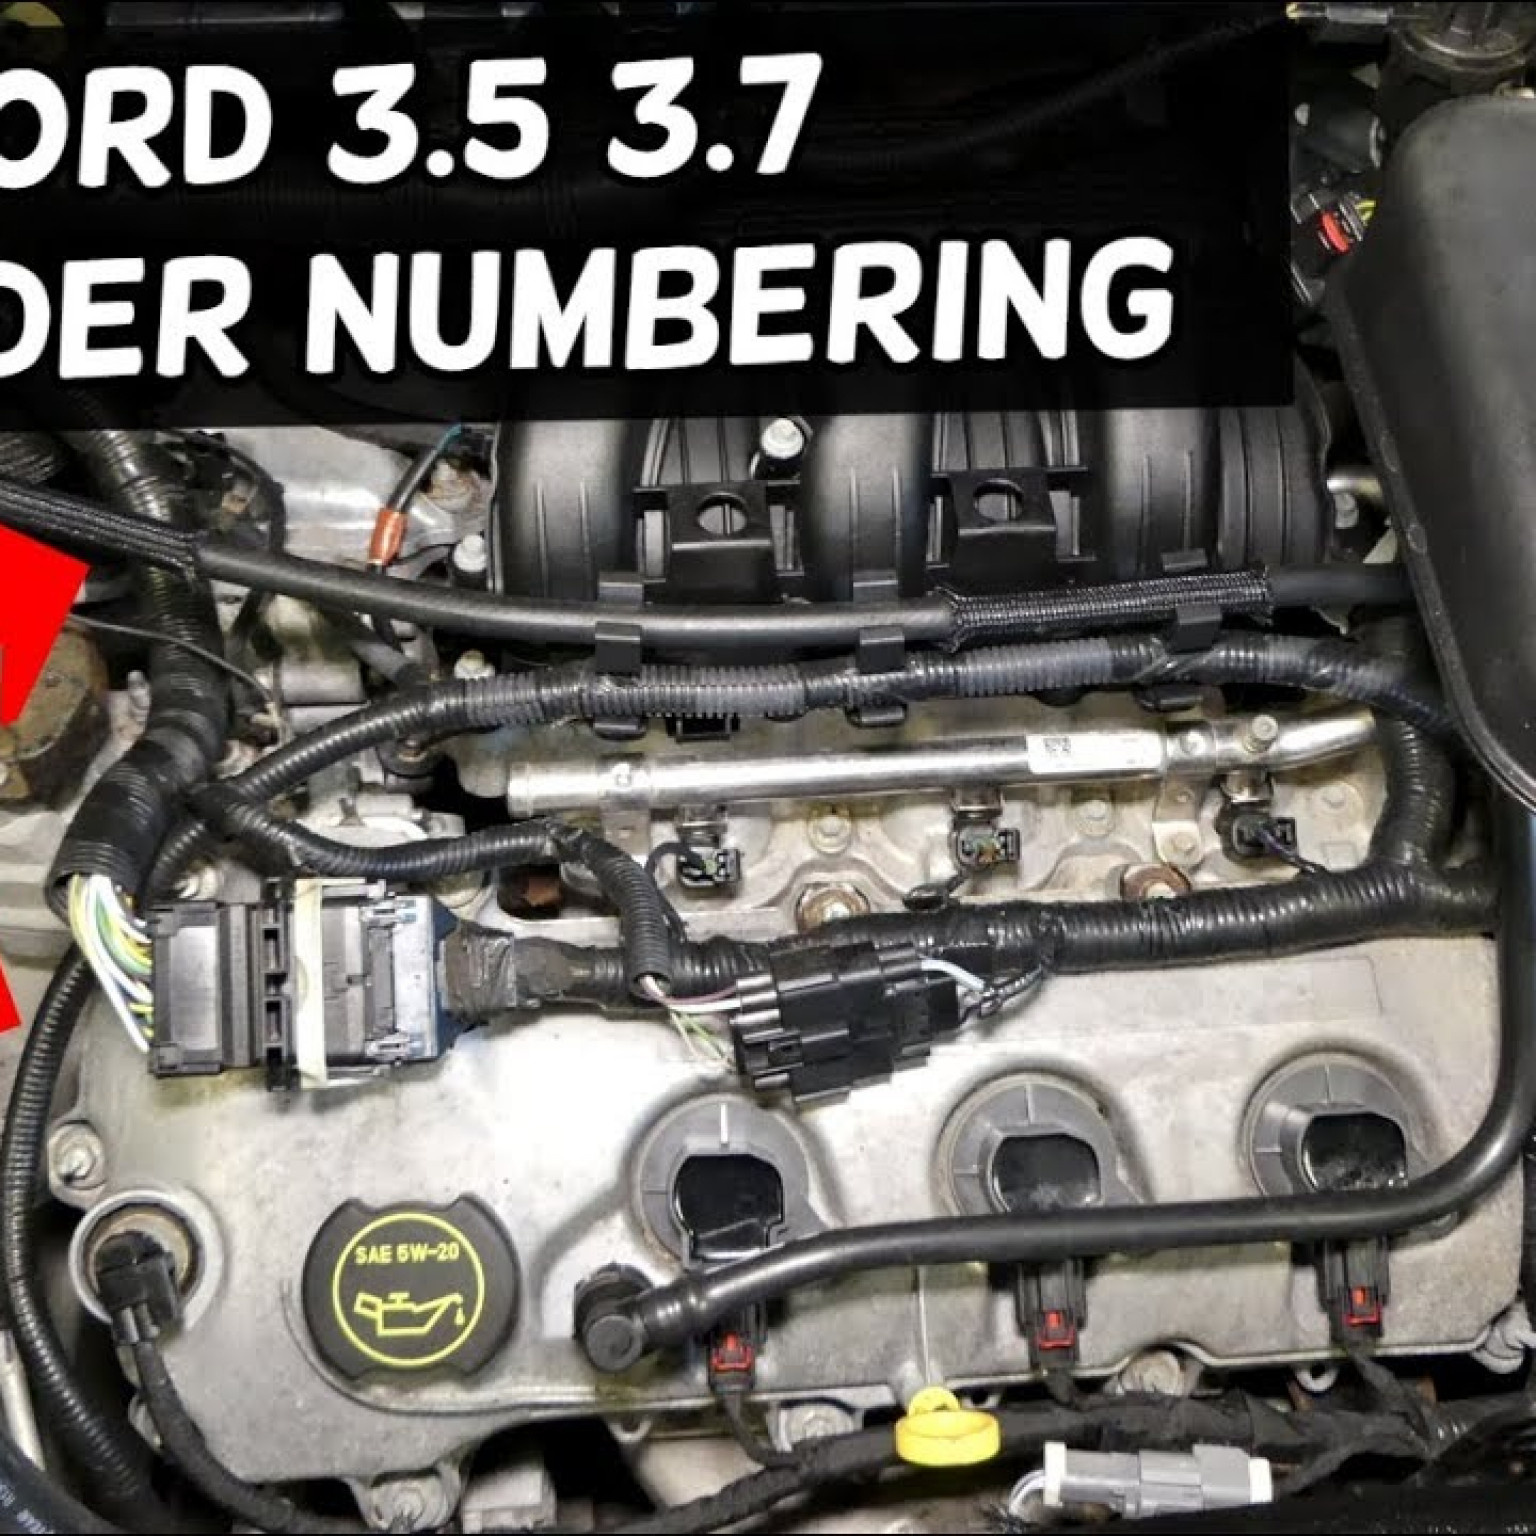 2015 Ford Expedition 3.5 Firing Order | Wiring and Printable